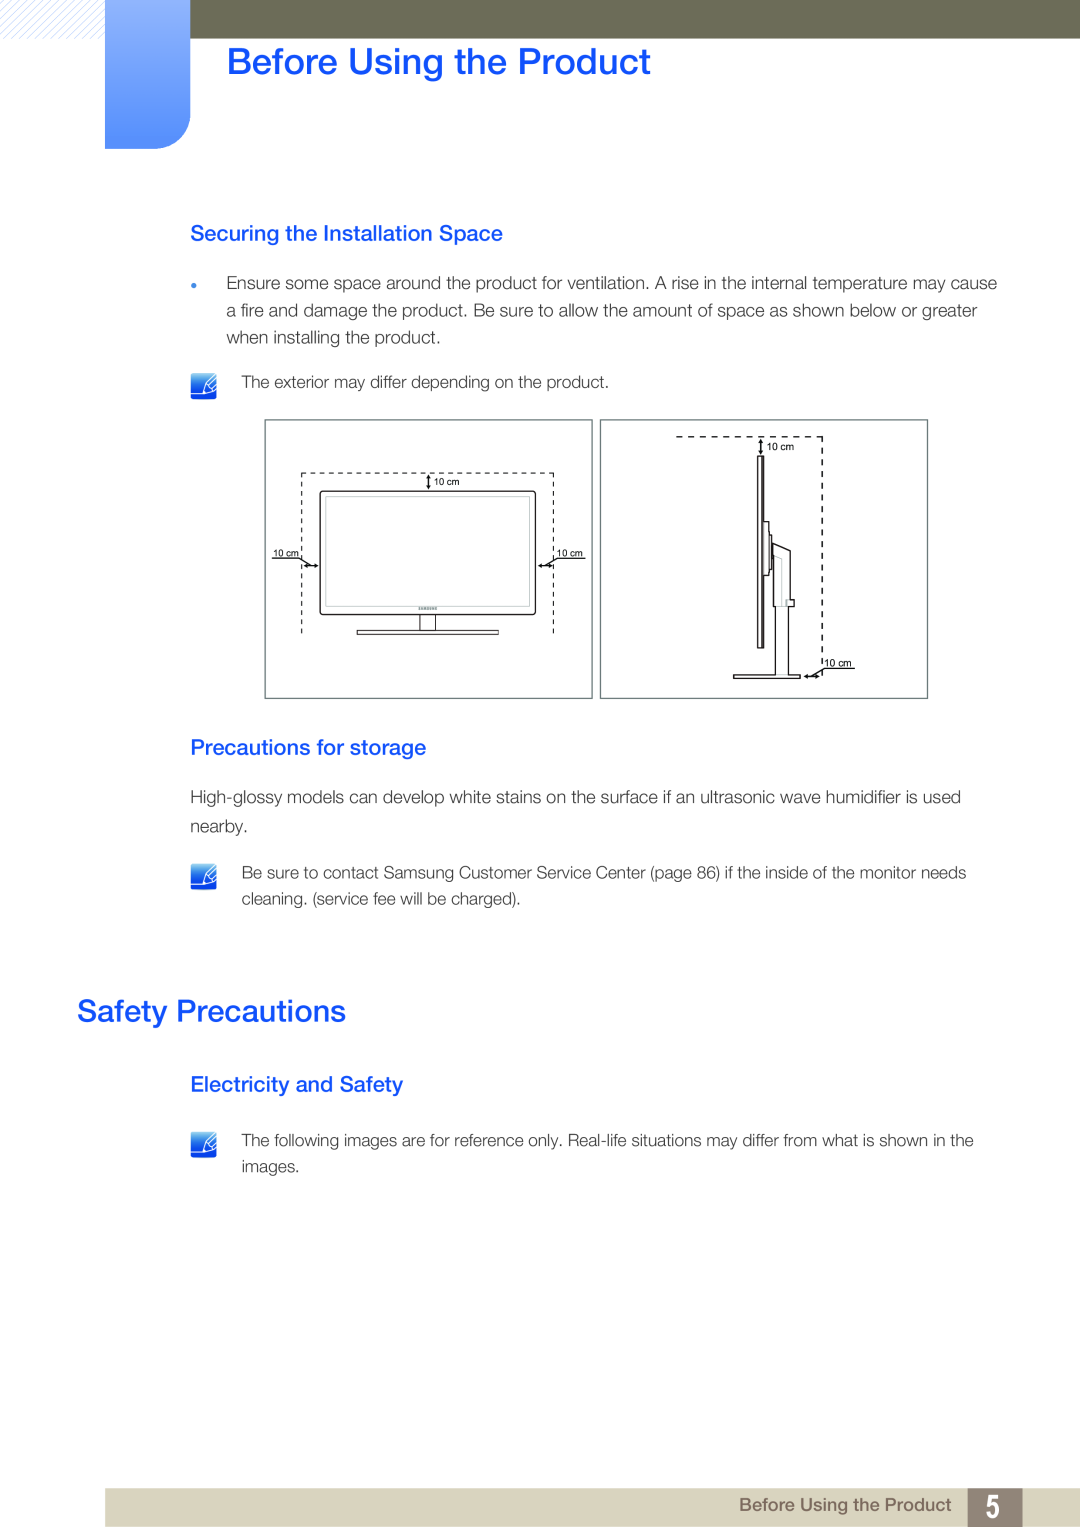 Samsung S27A650D Safety Precautions, Securing the Installation Space, Precautions for storage, Electricity and Safety 